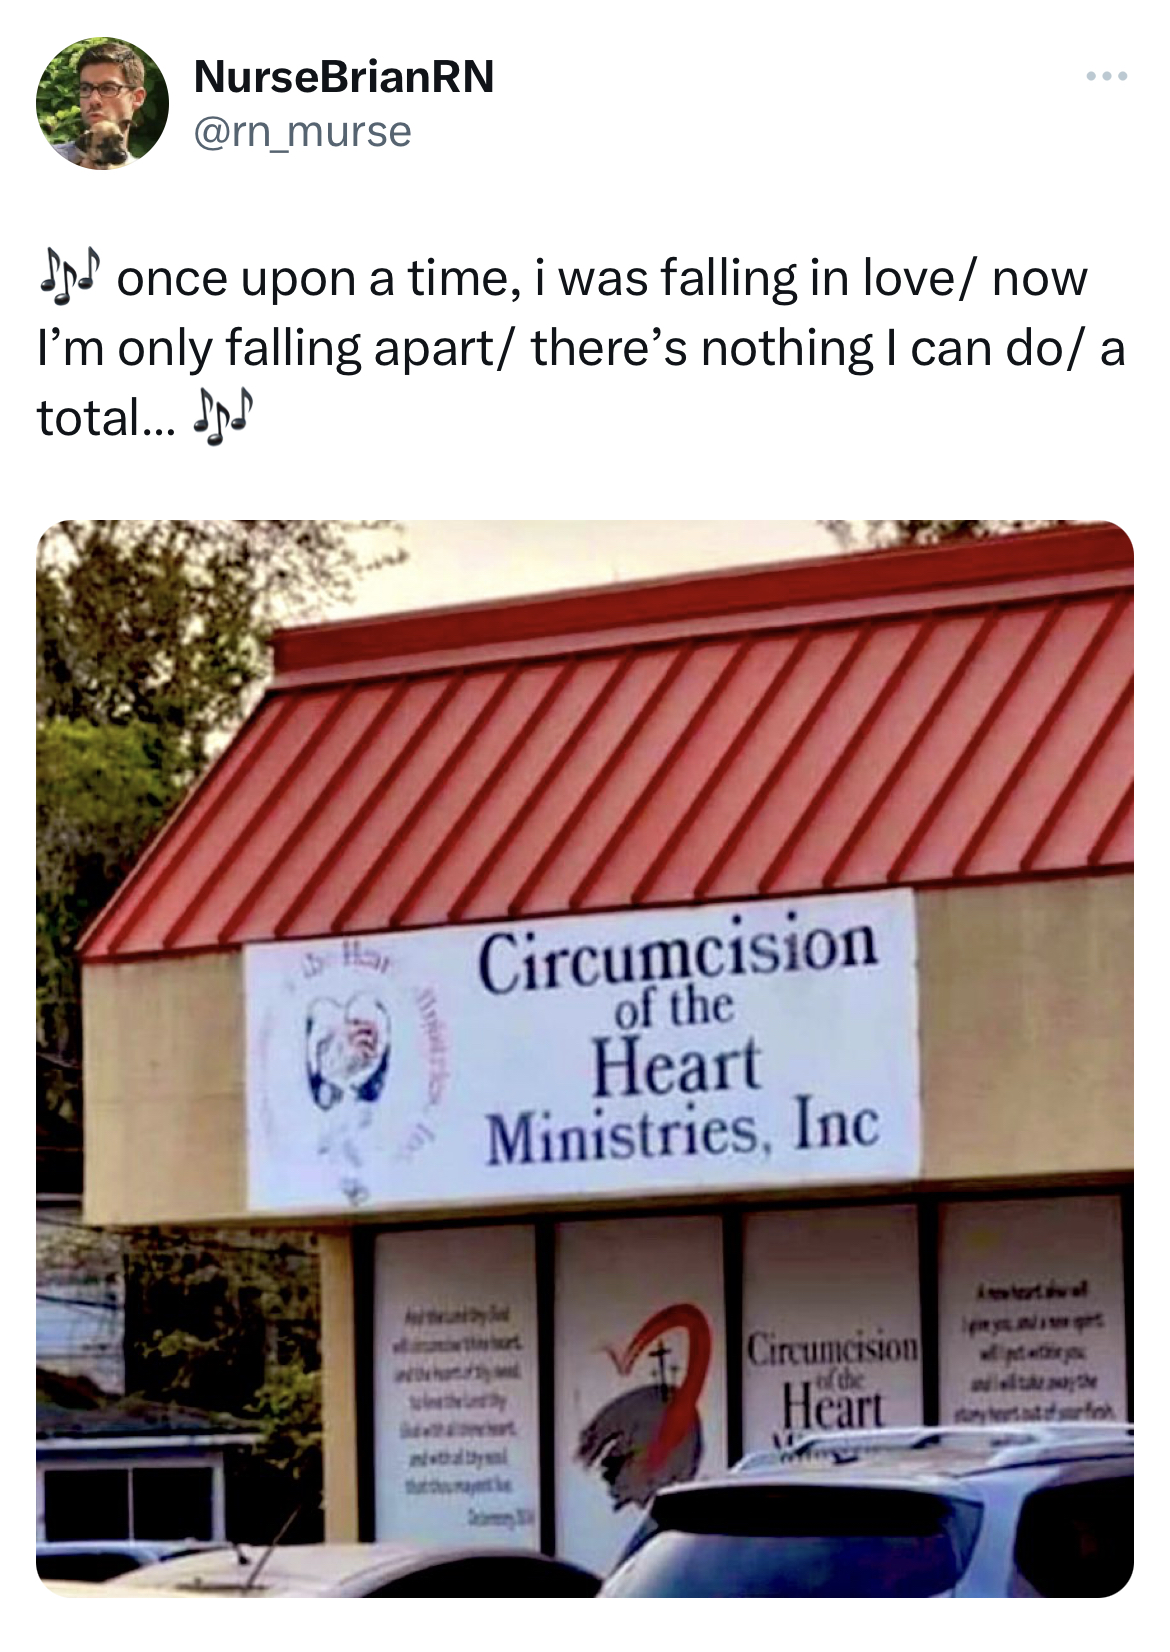 savage tweets - roof - NurseBrianRN once upon a time, i was falling in love now I'm only falling apart there's nothing I can do a total... Circumcision of the Heart Ministries, Inc Circumcision Heart